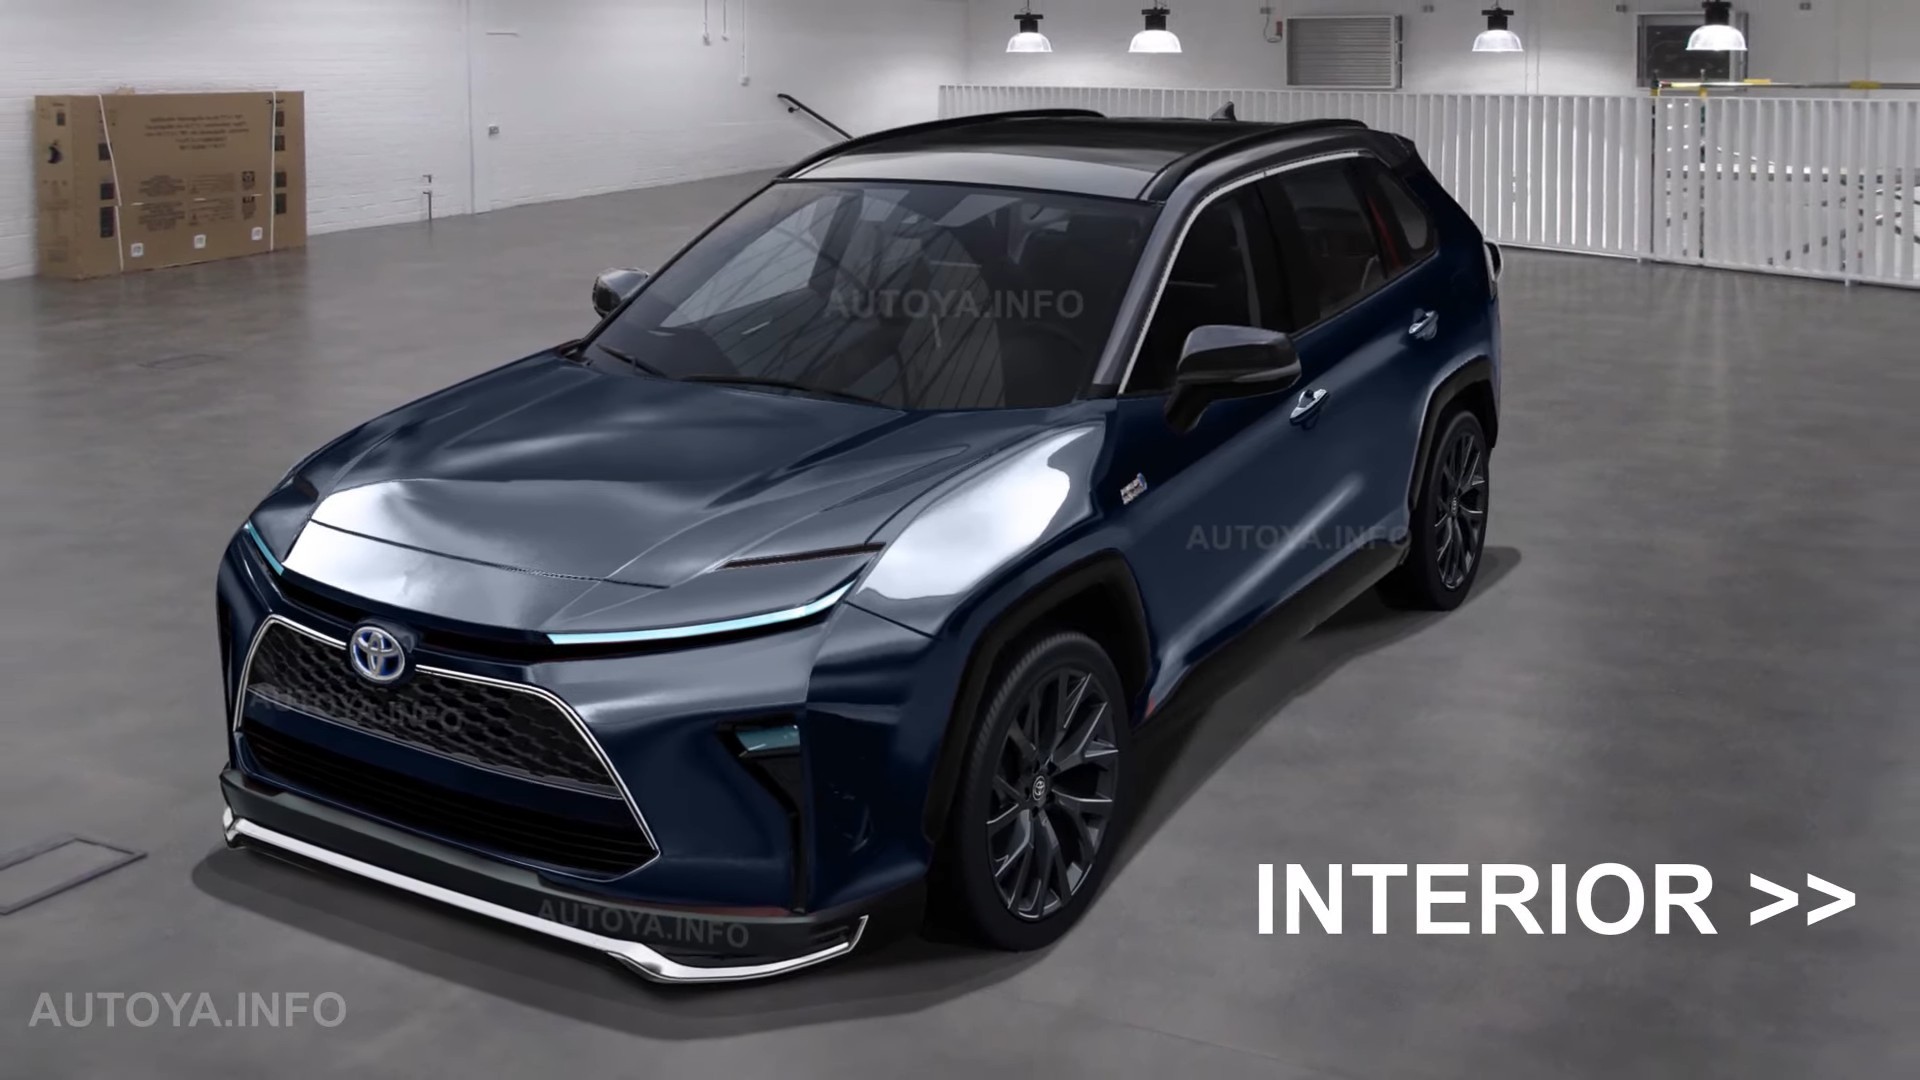 2024 Toyota RAV4 Compact CUV Gets Another Informal Exterior, Interior